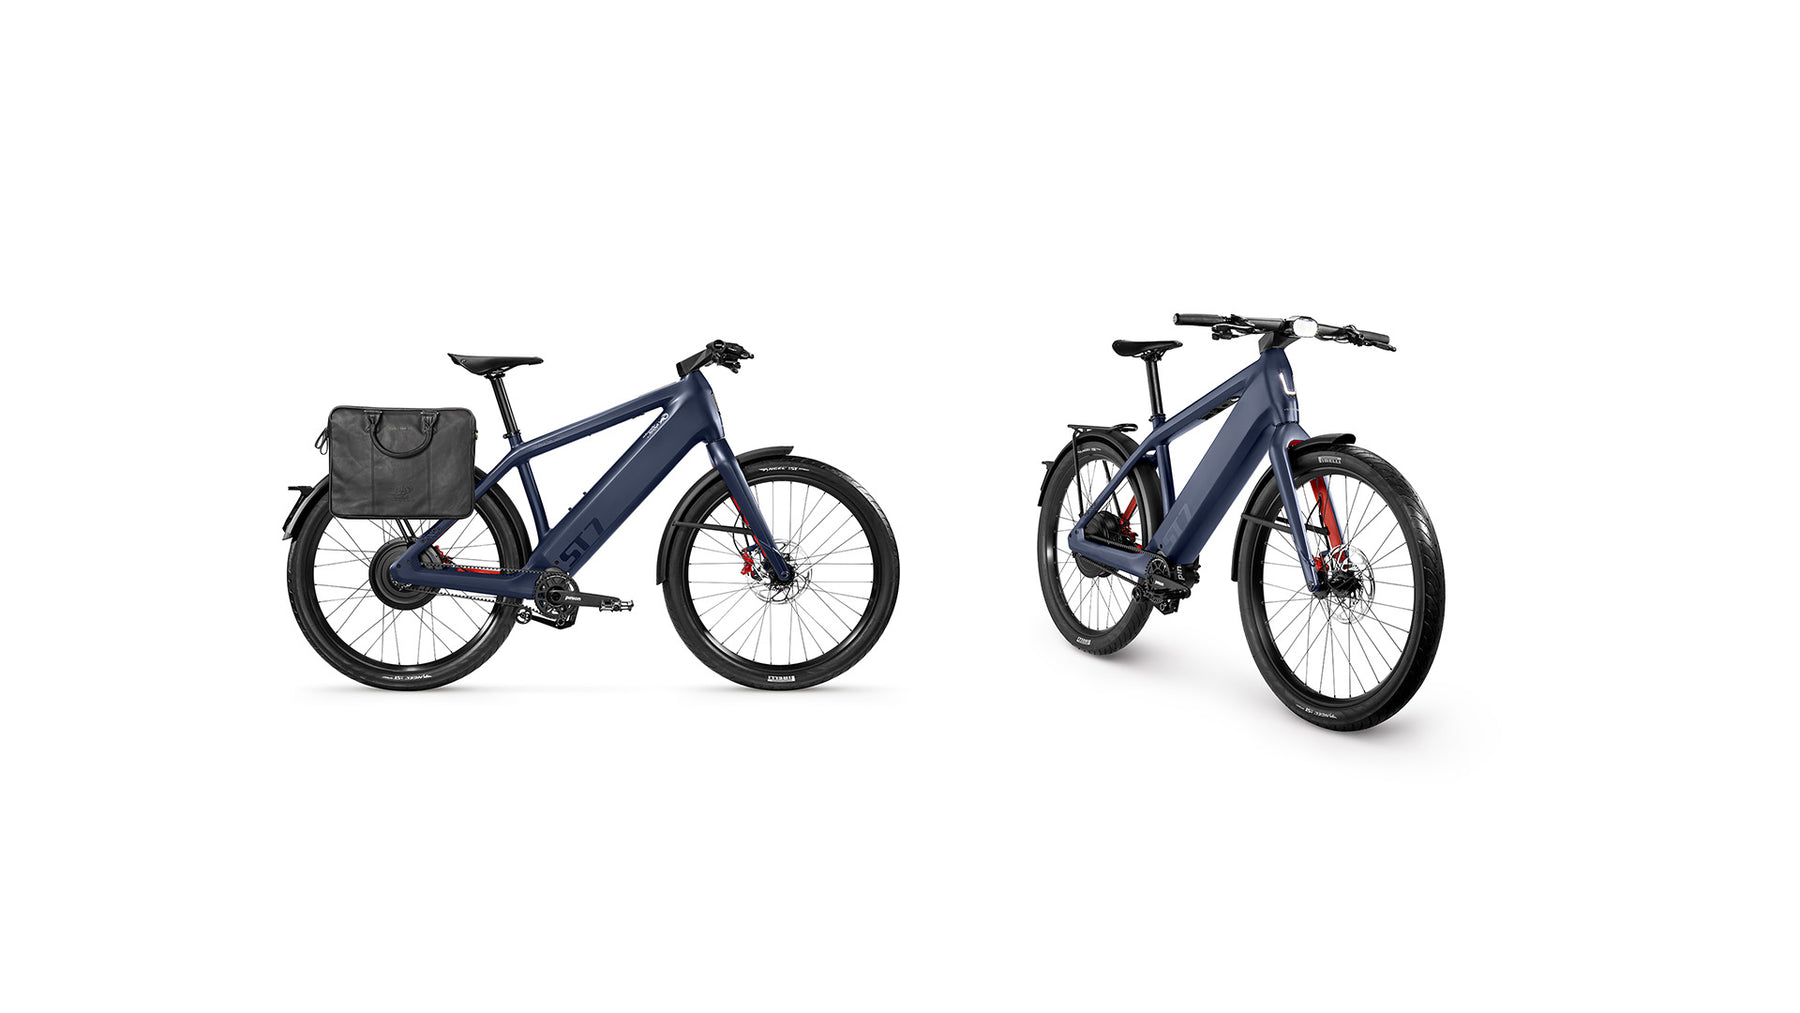 Two Stromer ST7 Alinghi Red Bull Racing Edition electric bicycles shown from different angles, featuring blue frames, rear saddlebags, and mounted black tires on a white background. These eBikes are equipped with SYNO Drive S motors.